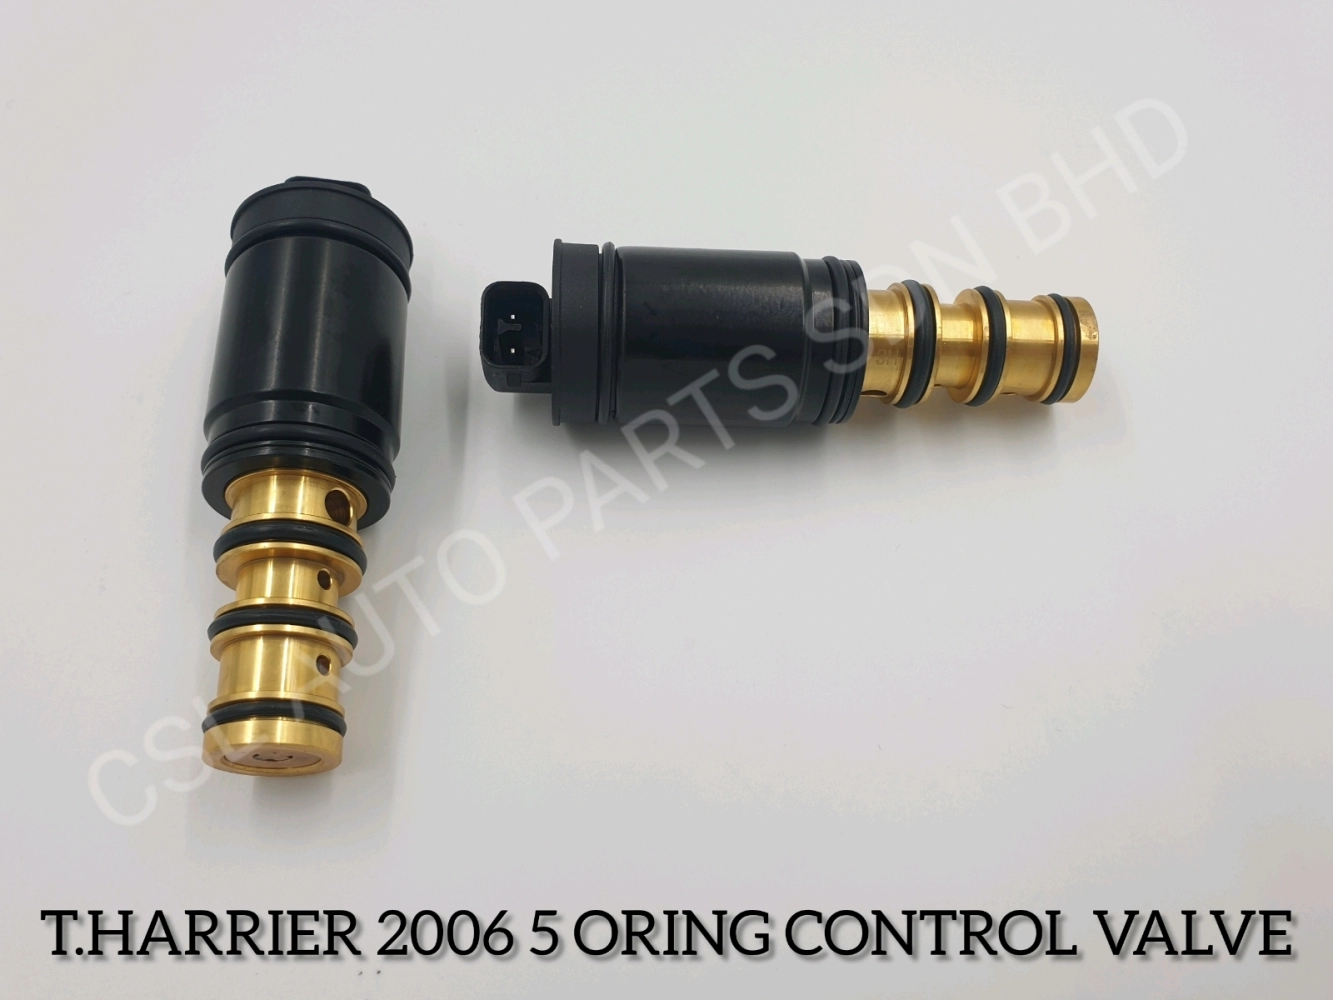 HS 10A29 Toyota Harrier 2006 5 oring control valve